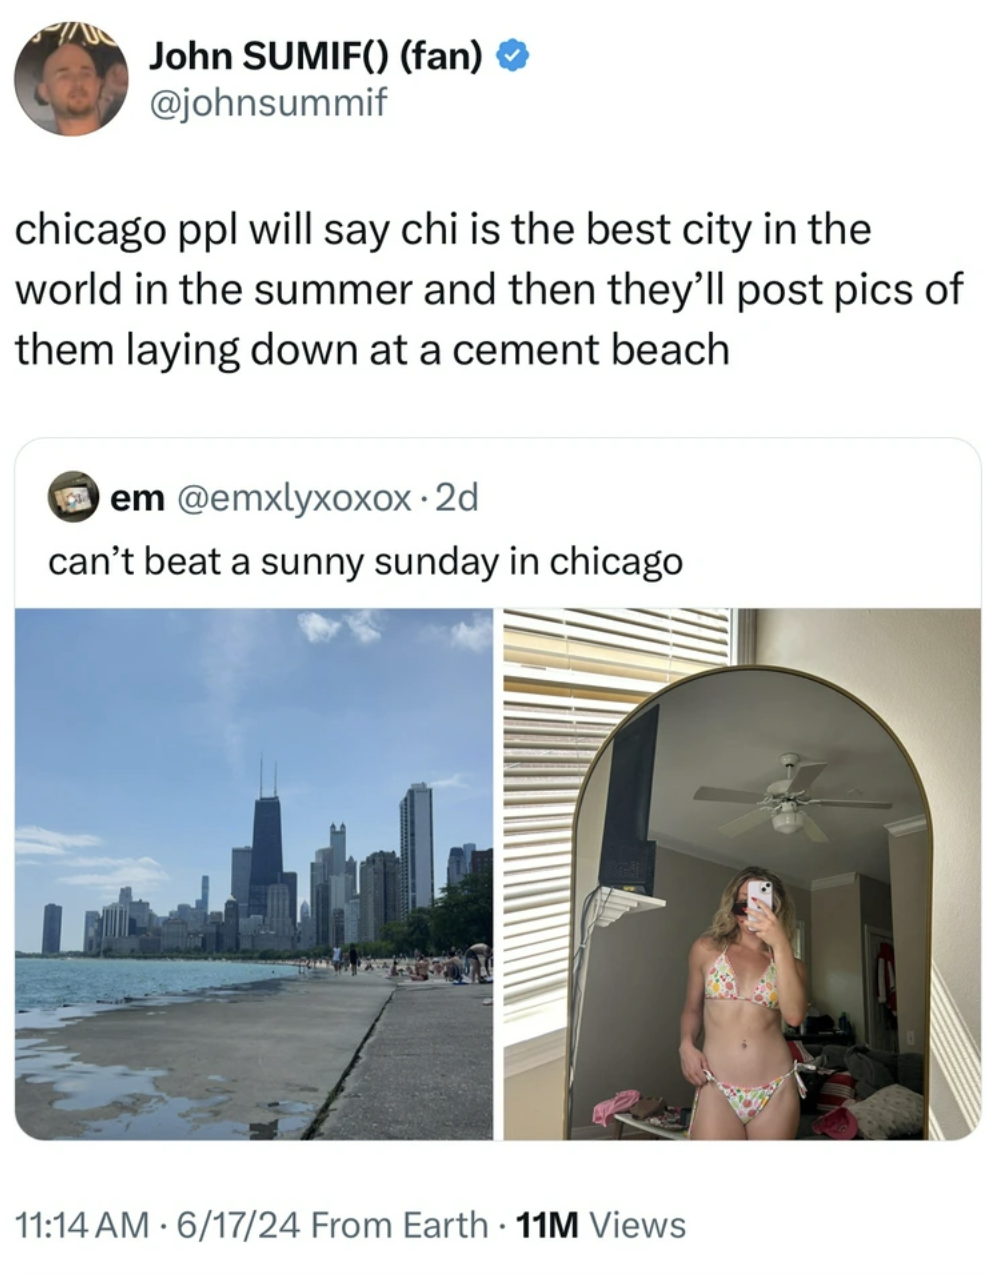 downtown - John Sumif fan chicago ppl will say chi is the best city in the world in the summer and then they'll post pics of them laying down at a cement beach em 2d can't beat a sunny sunday in chicago . 61724 From Earth 11M Views